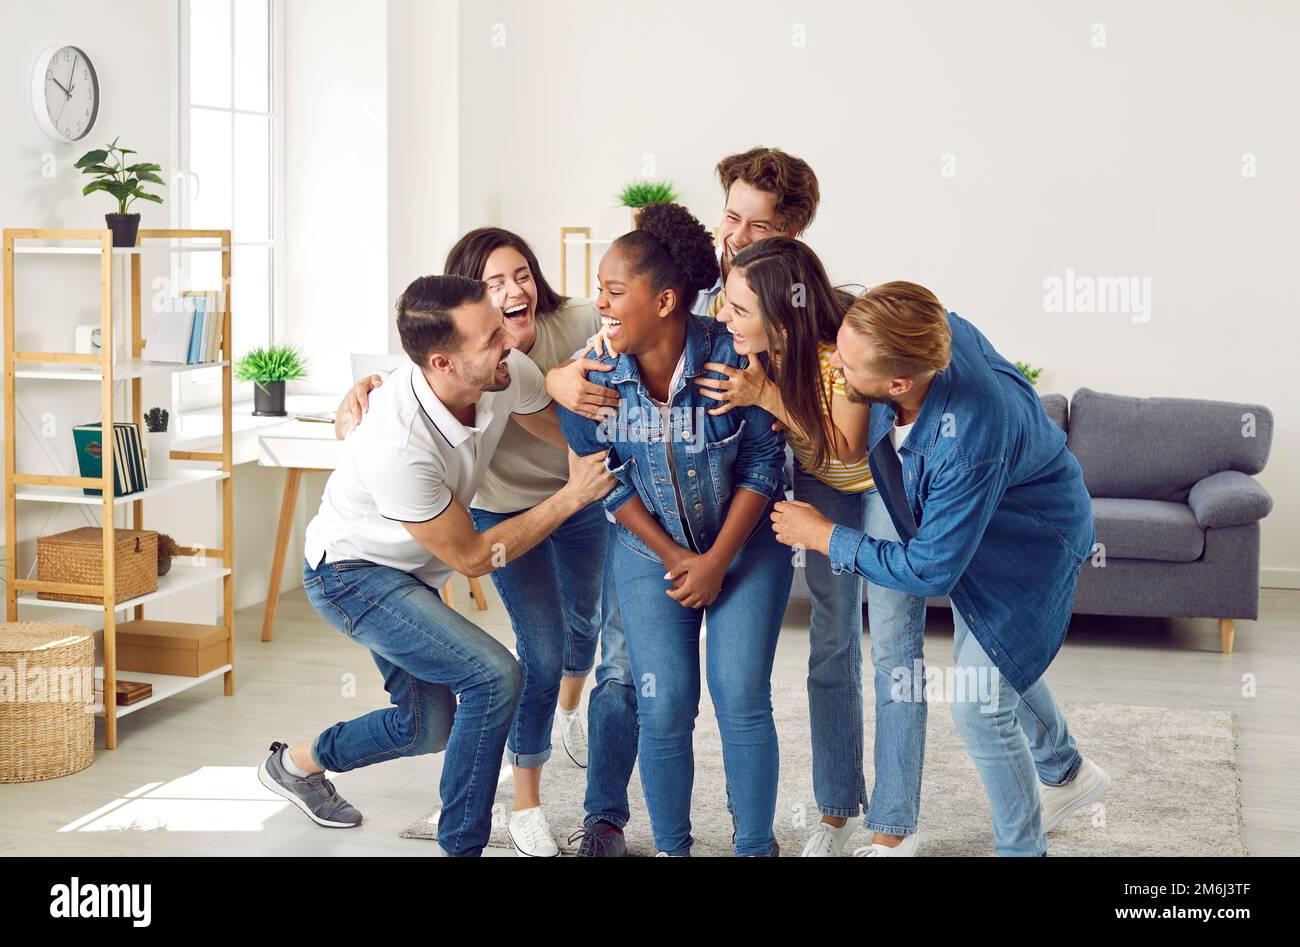 Happy young people laughing at a funny joke their friend has told at a party at home Stock Photo